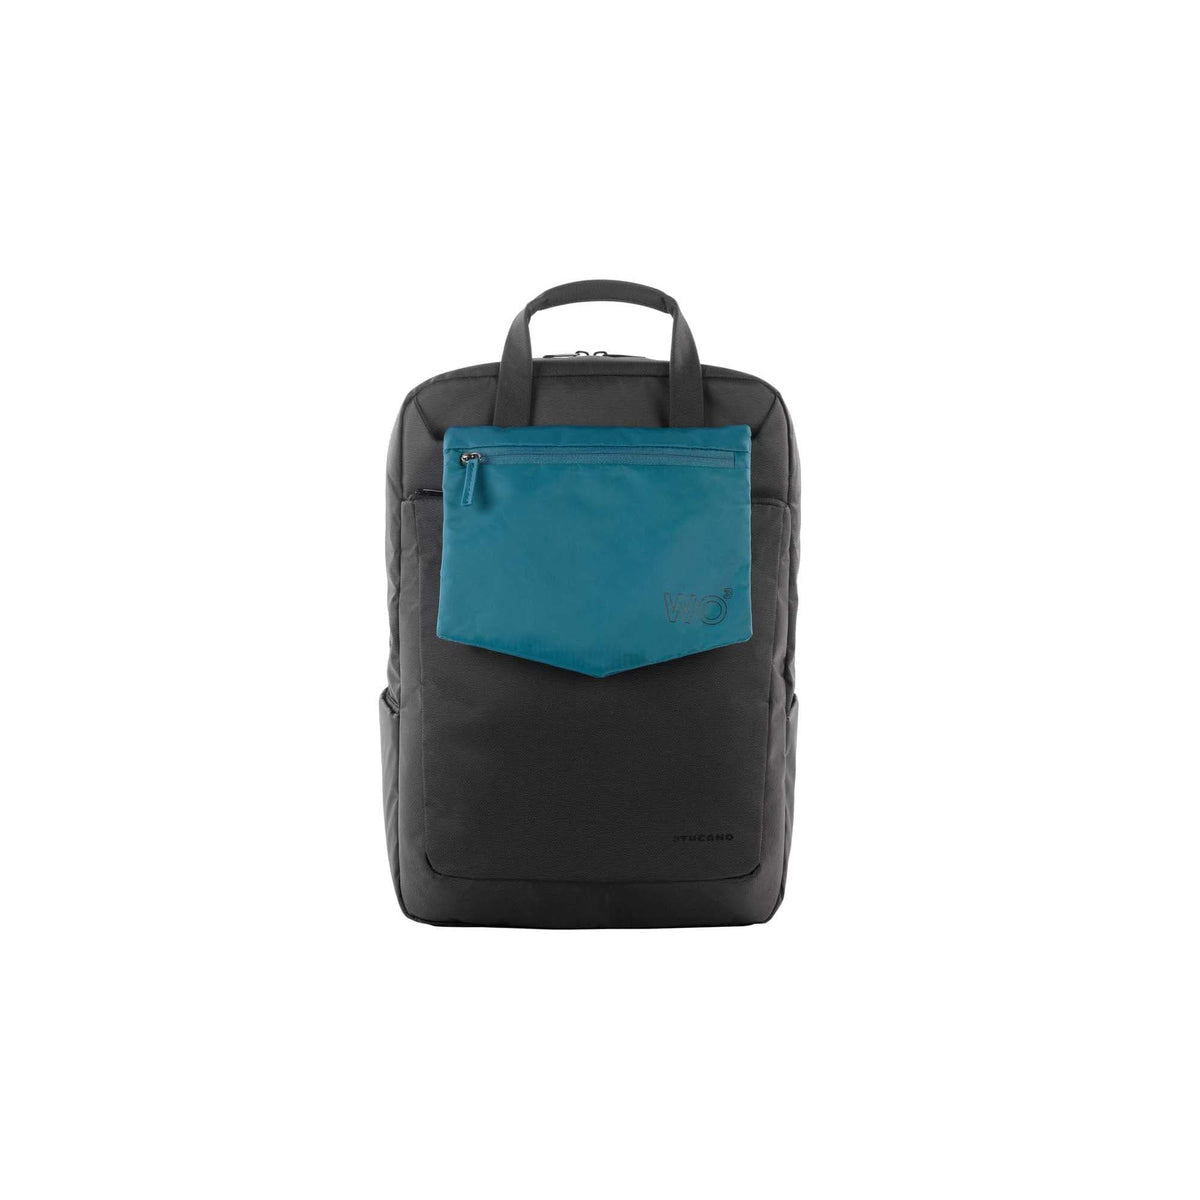 Tucano Work Out 3 Backpack for Pro 15" Macbook or 15.6" Ultrabook